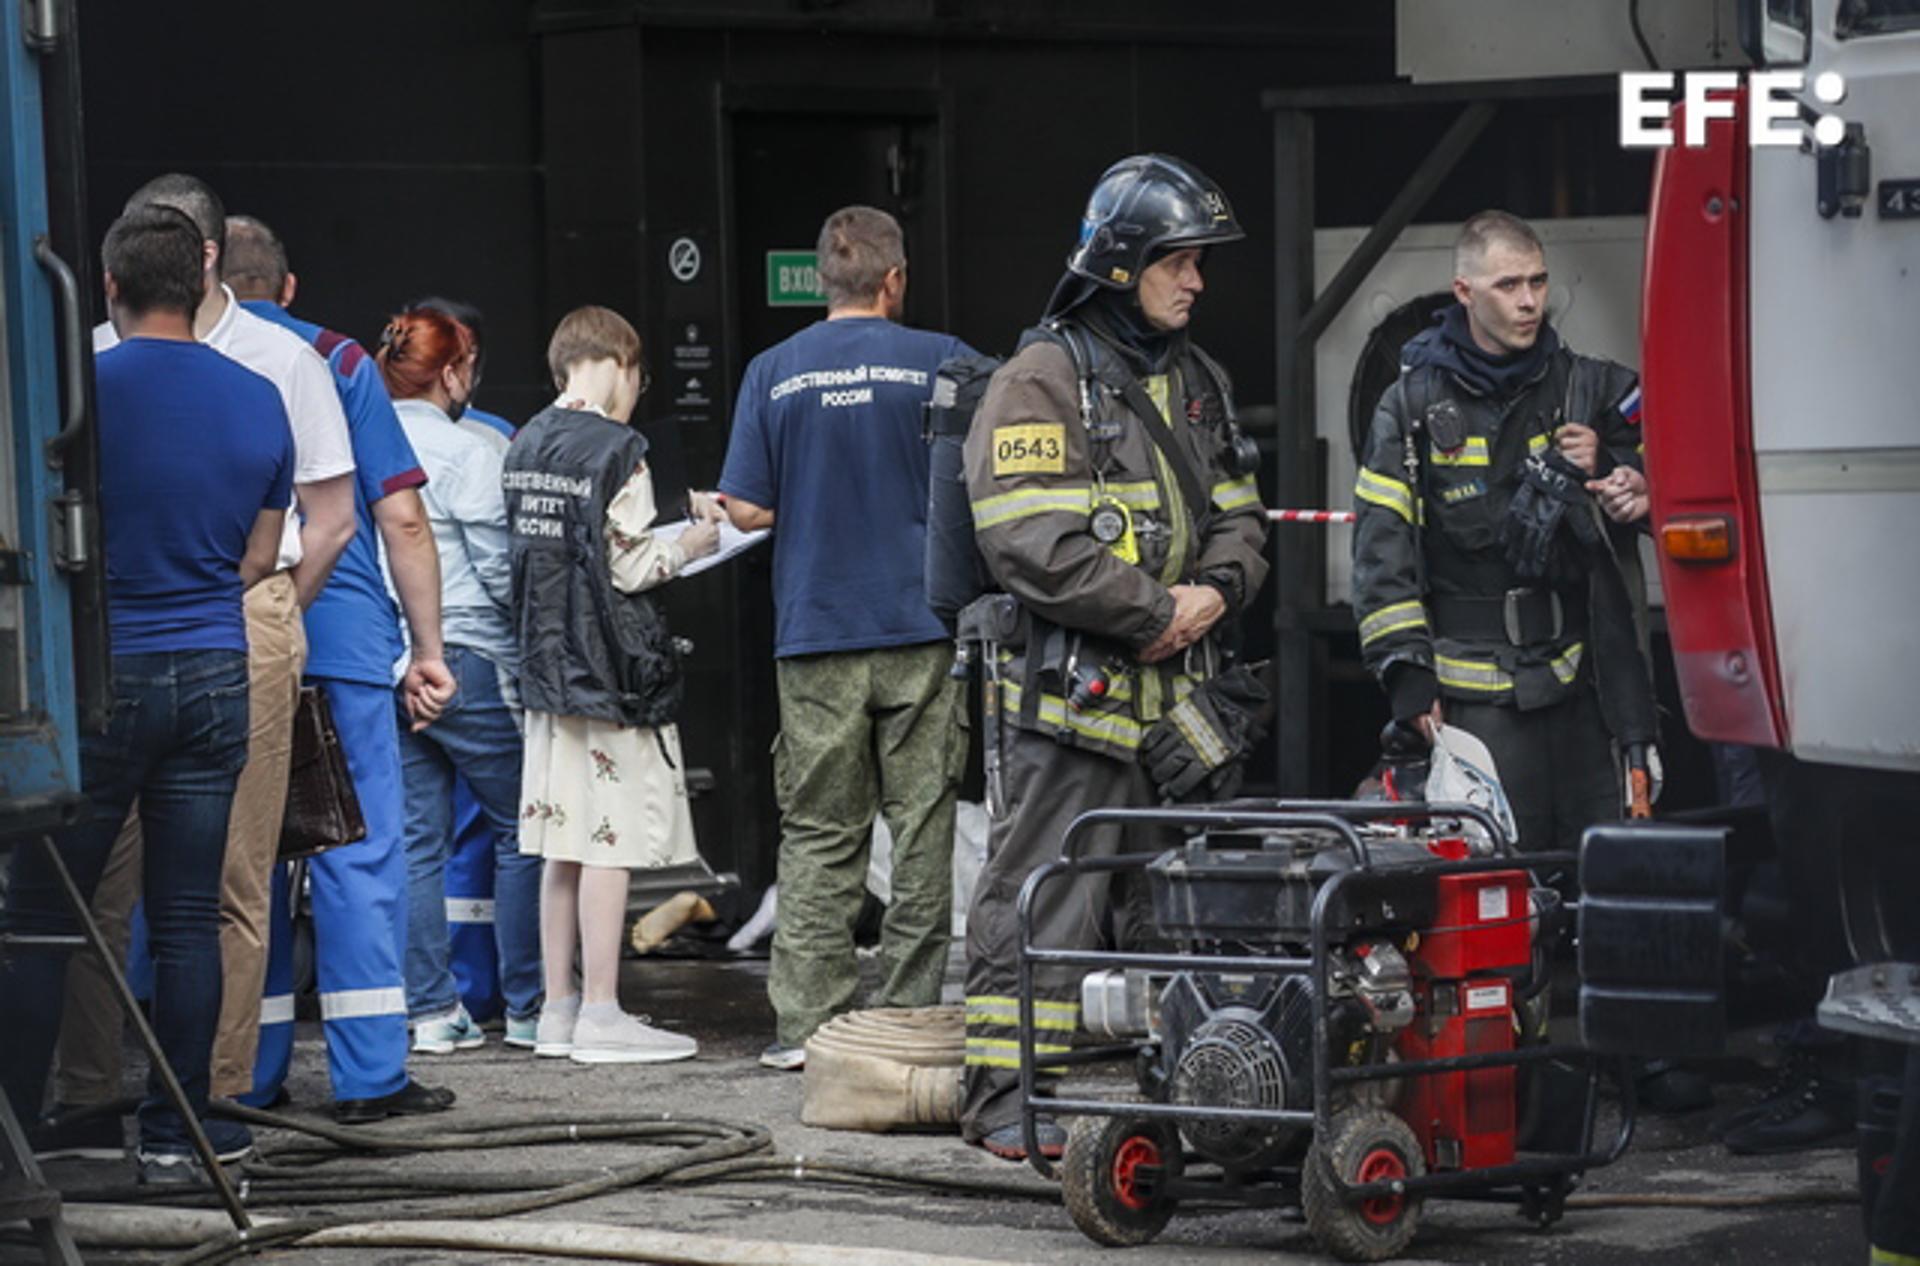 First responders at work after a hot water pipe burst inside a shopping center in Moscow on 22 July 2023. Four people were killed and others suffered severe burns. EFE/EPA/YURI KOCHETKOV